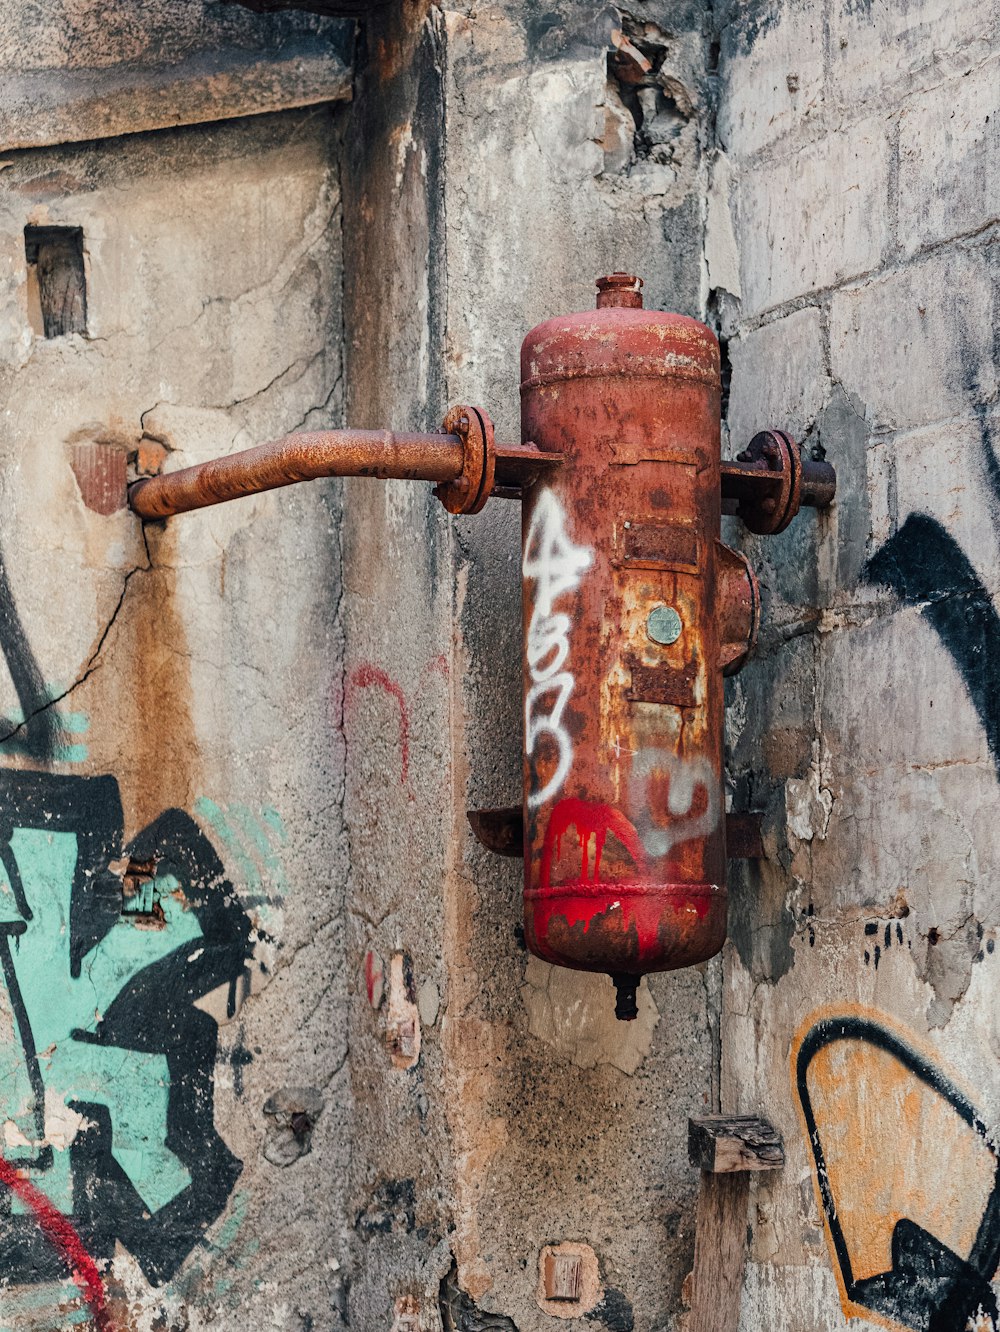 a rusted fire hydrant on the side of a building